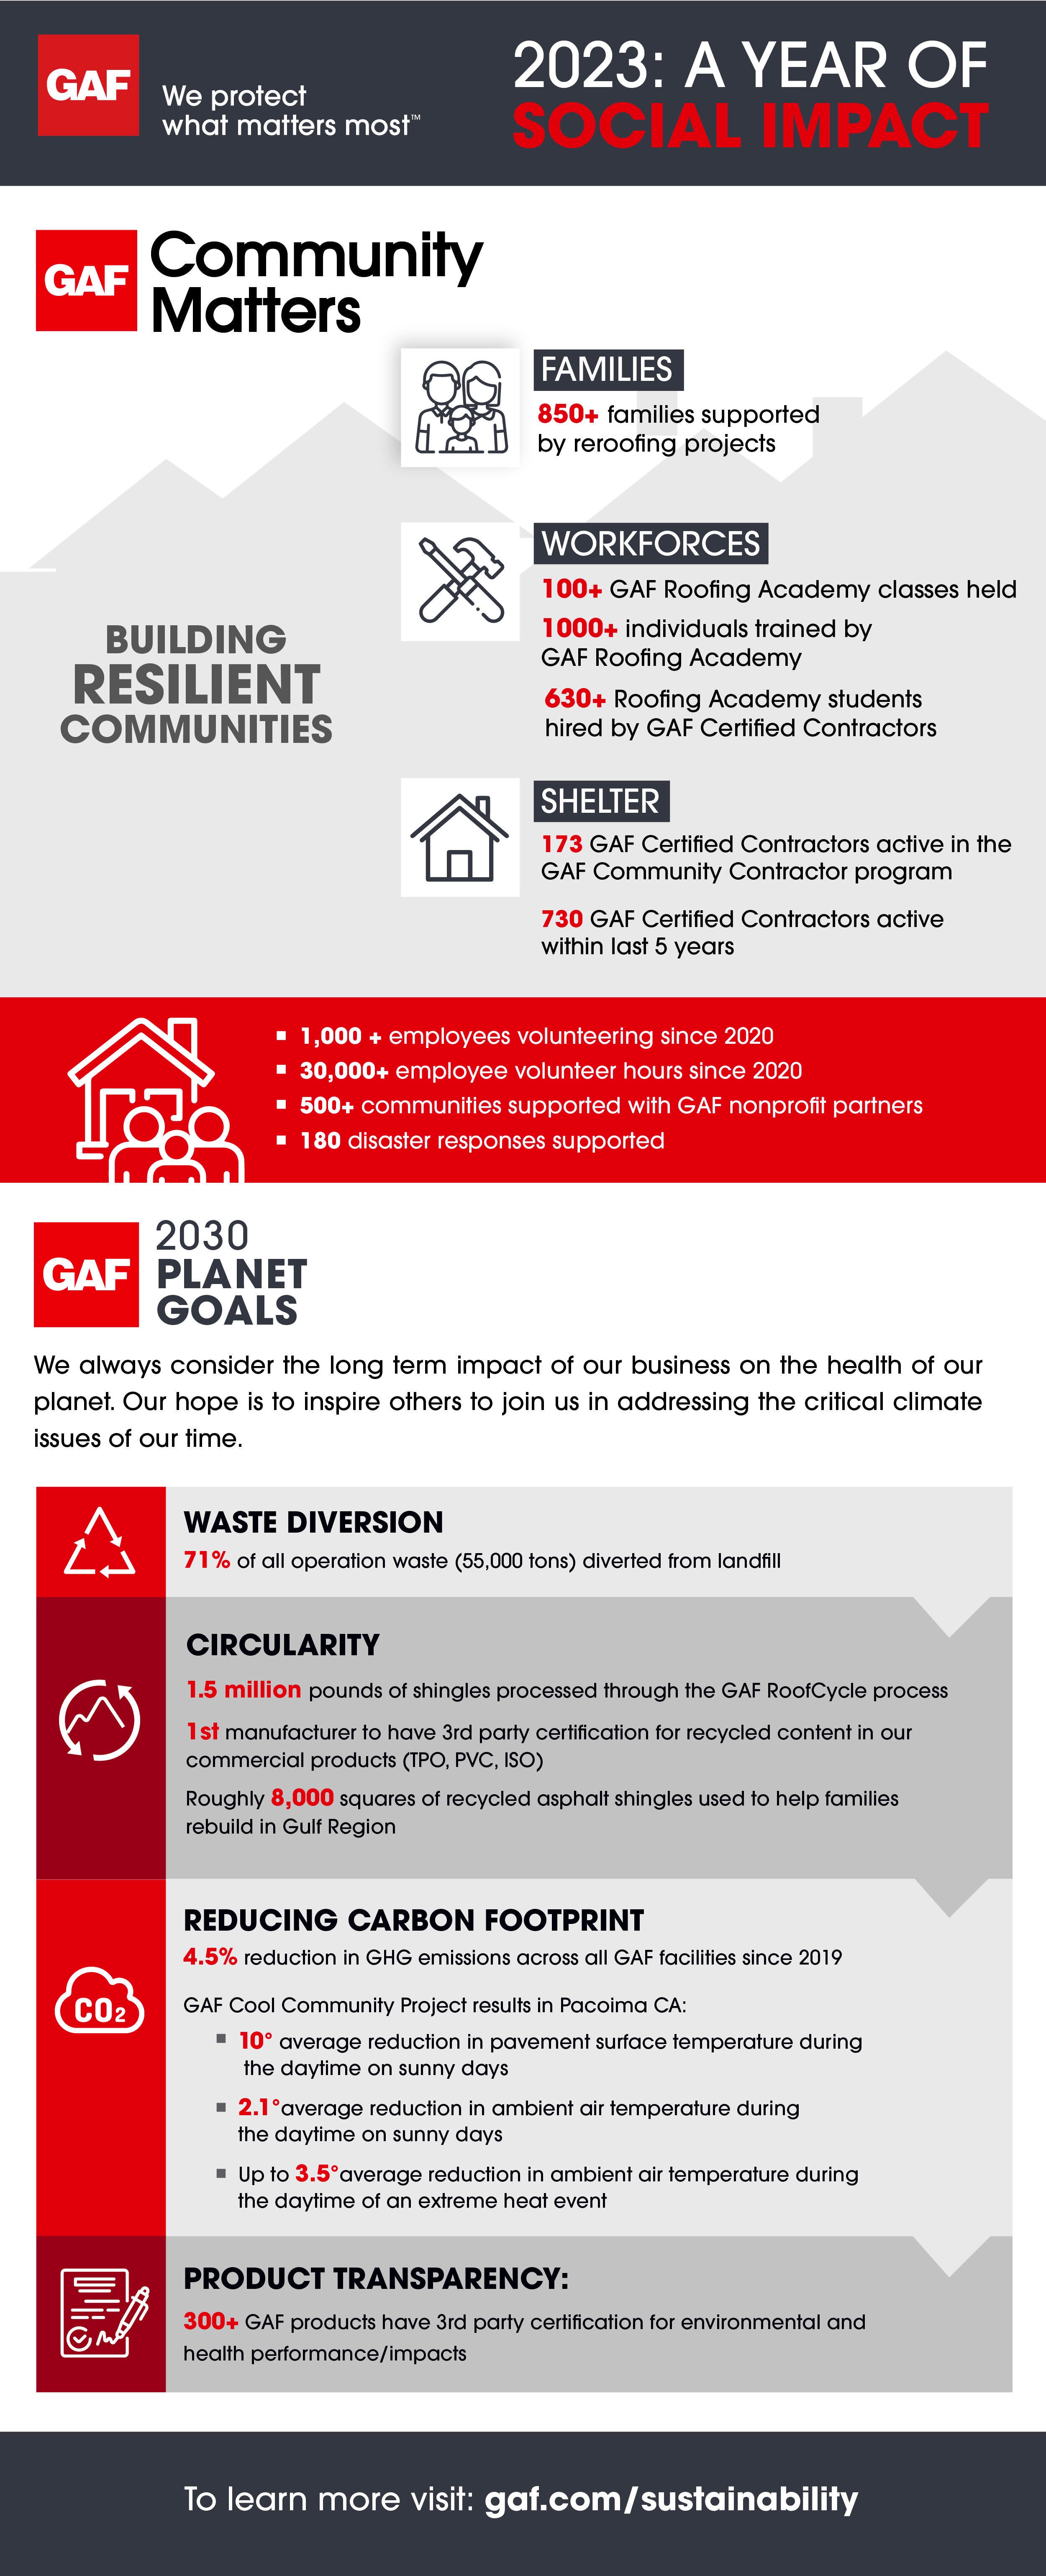 An infographic highlighting the social impact of GAF's many community projects in 2023